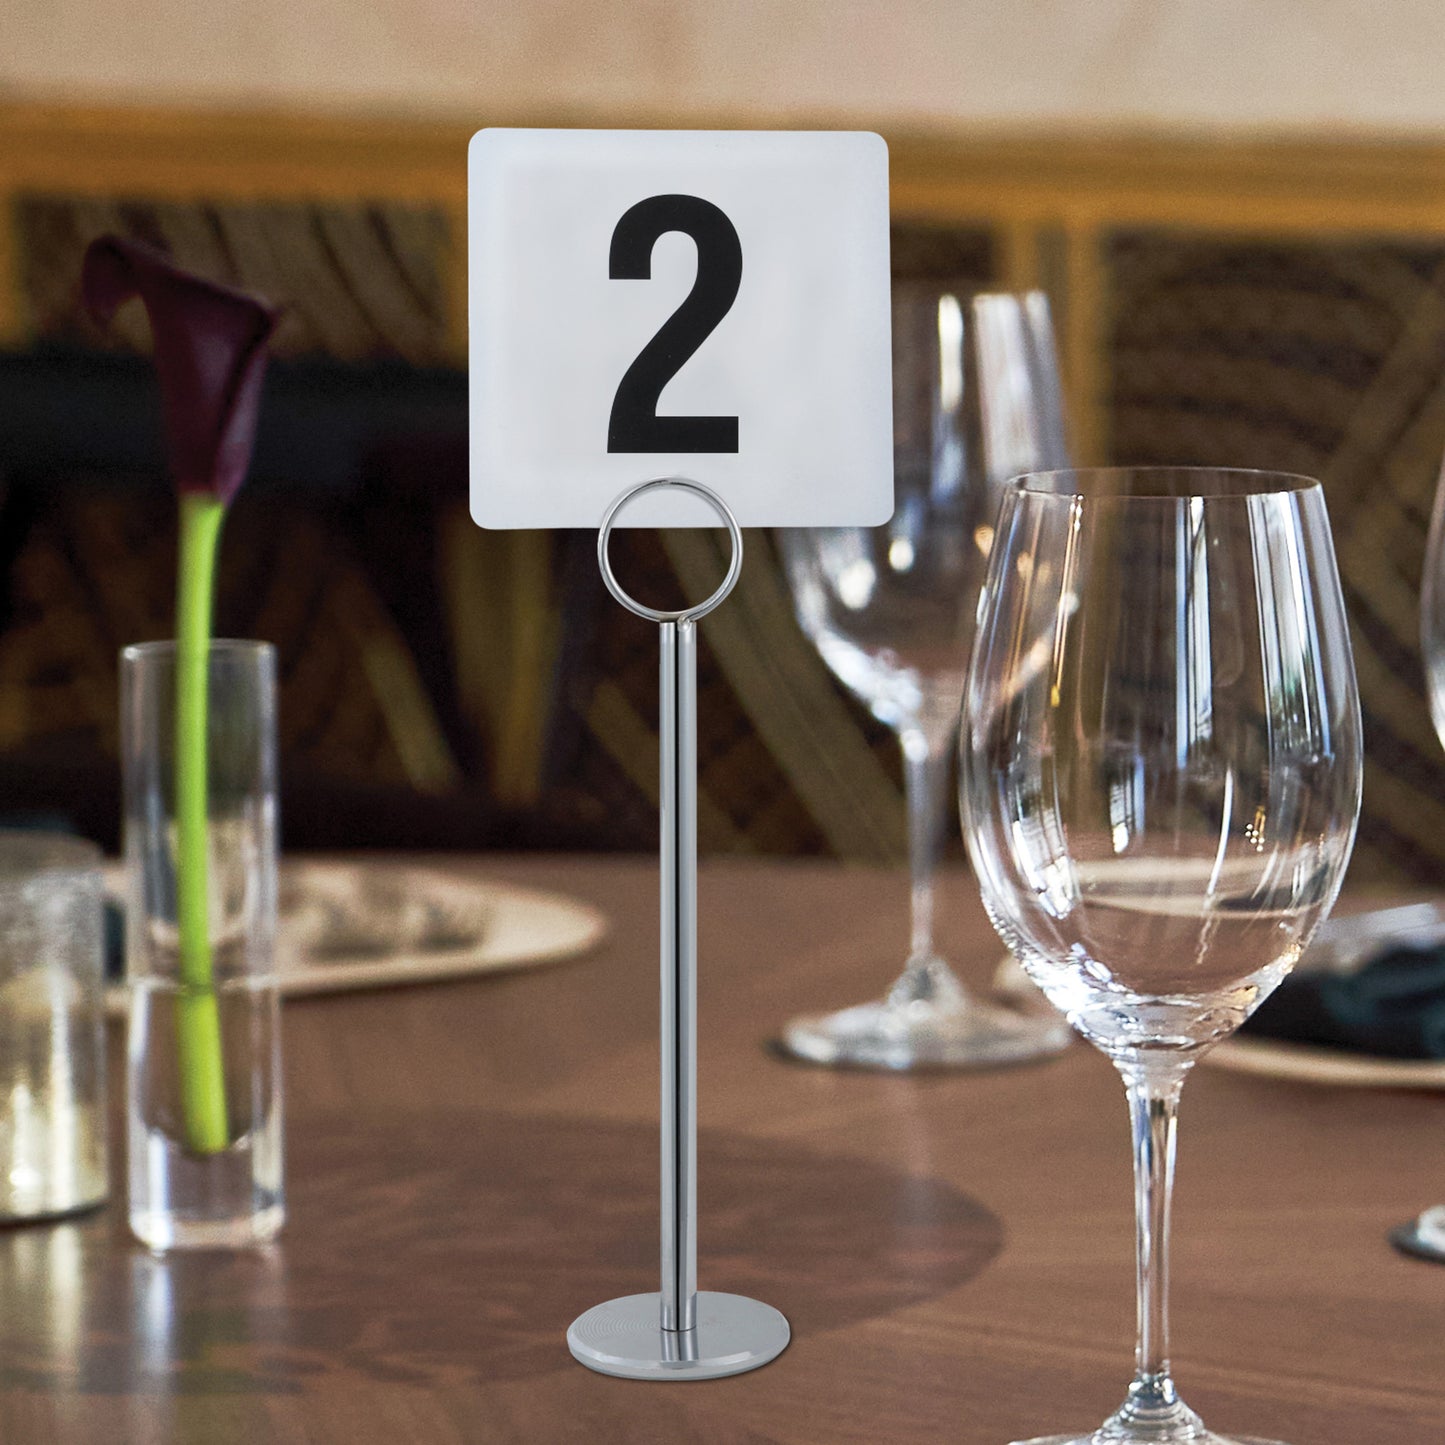 TBN-25 - Plastic Table Numbers, 1-25